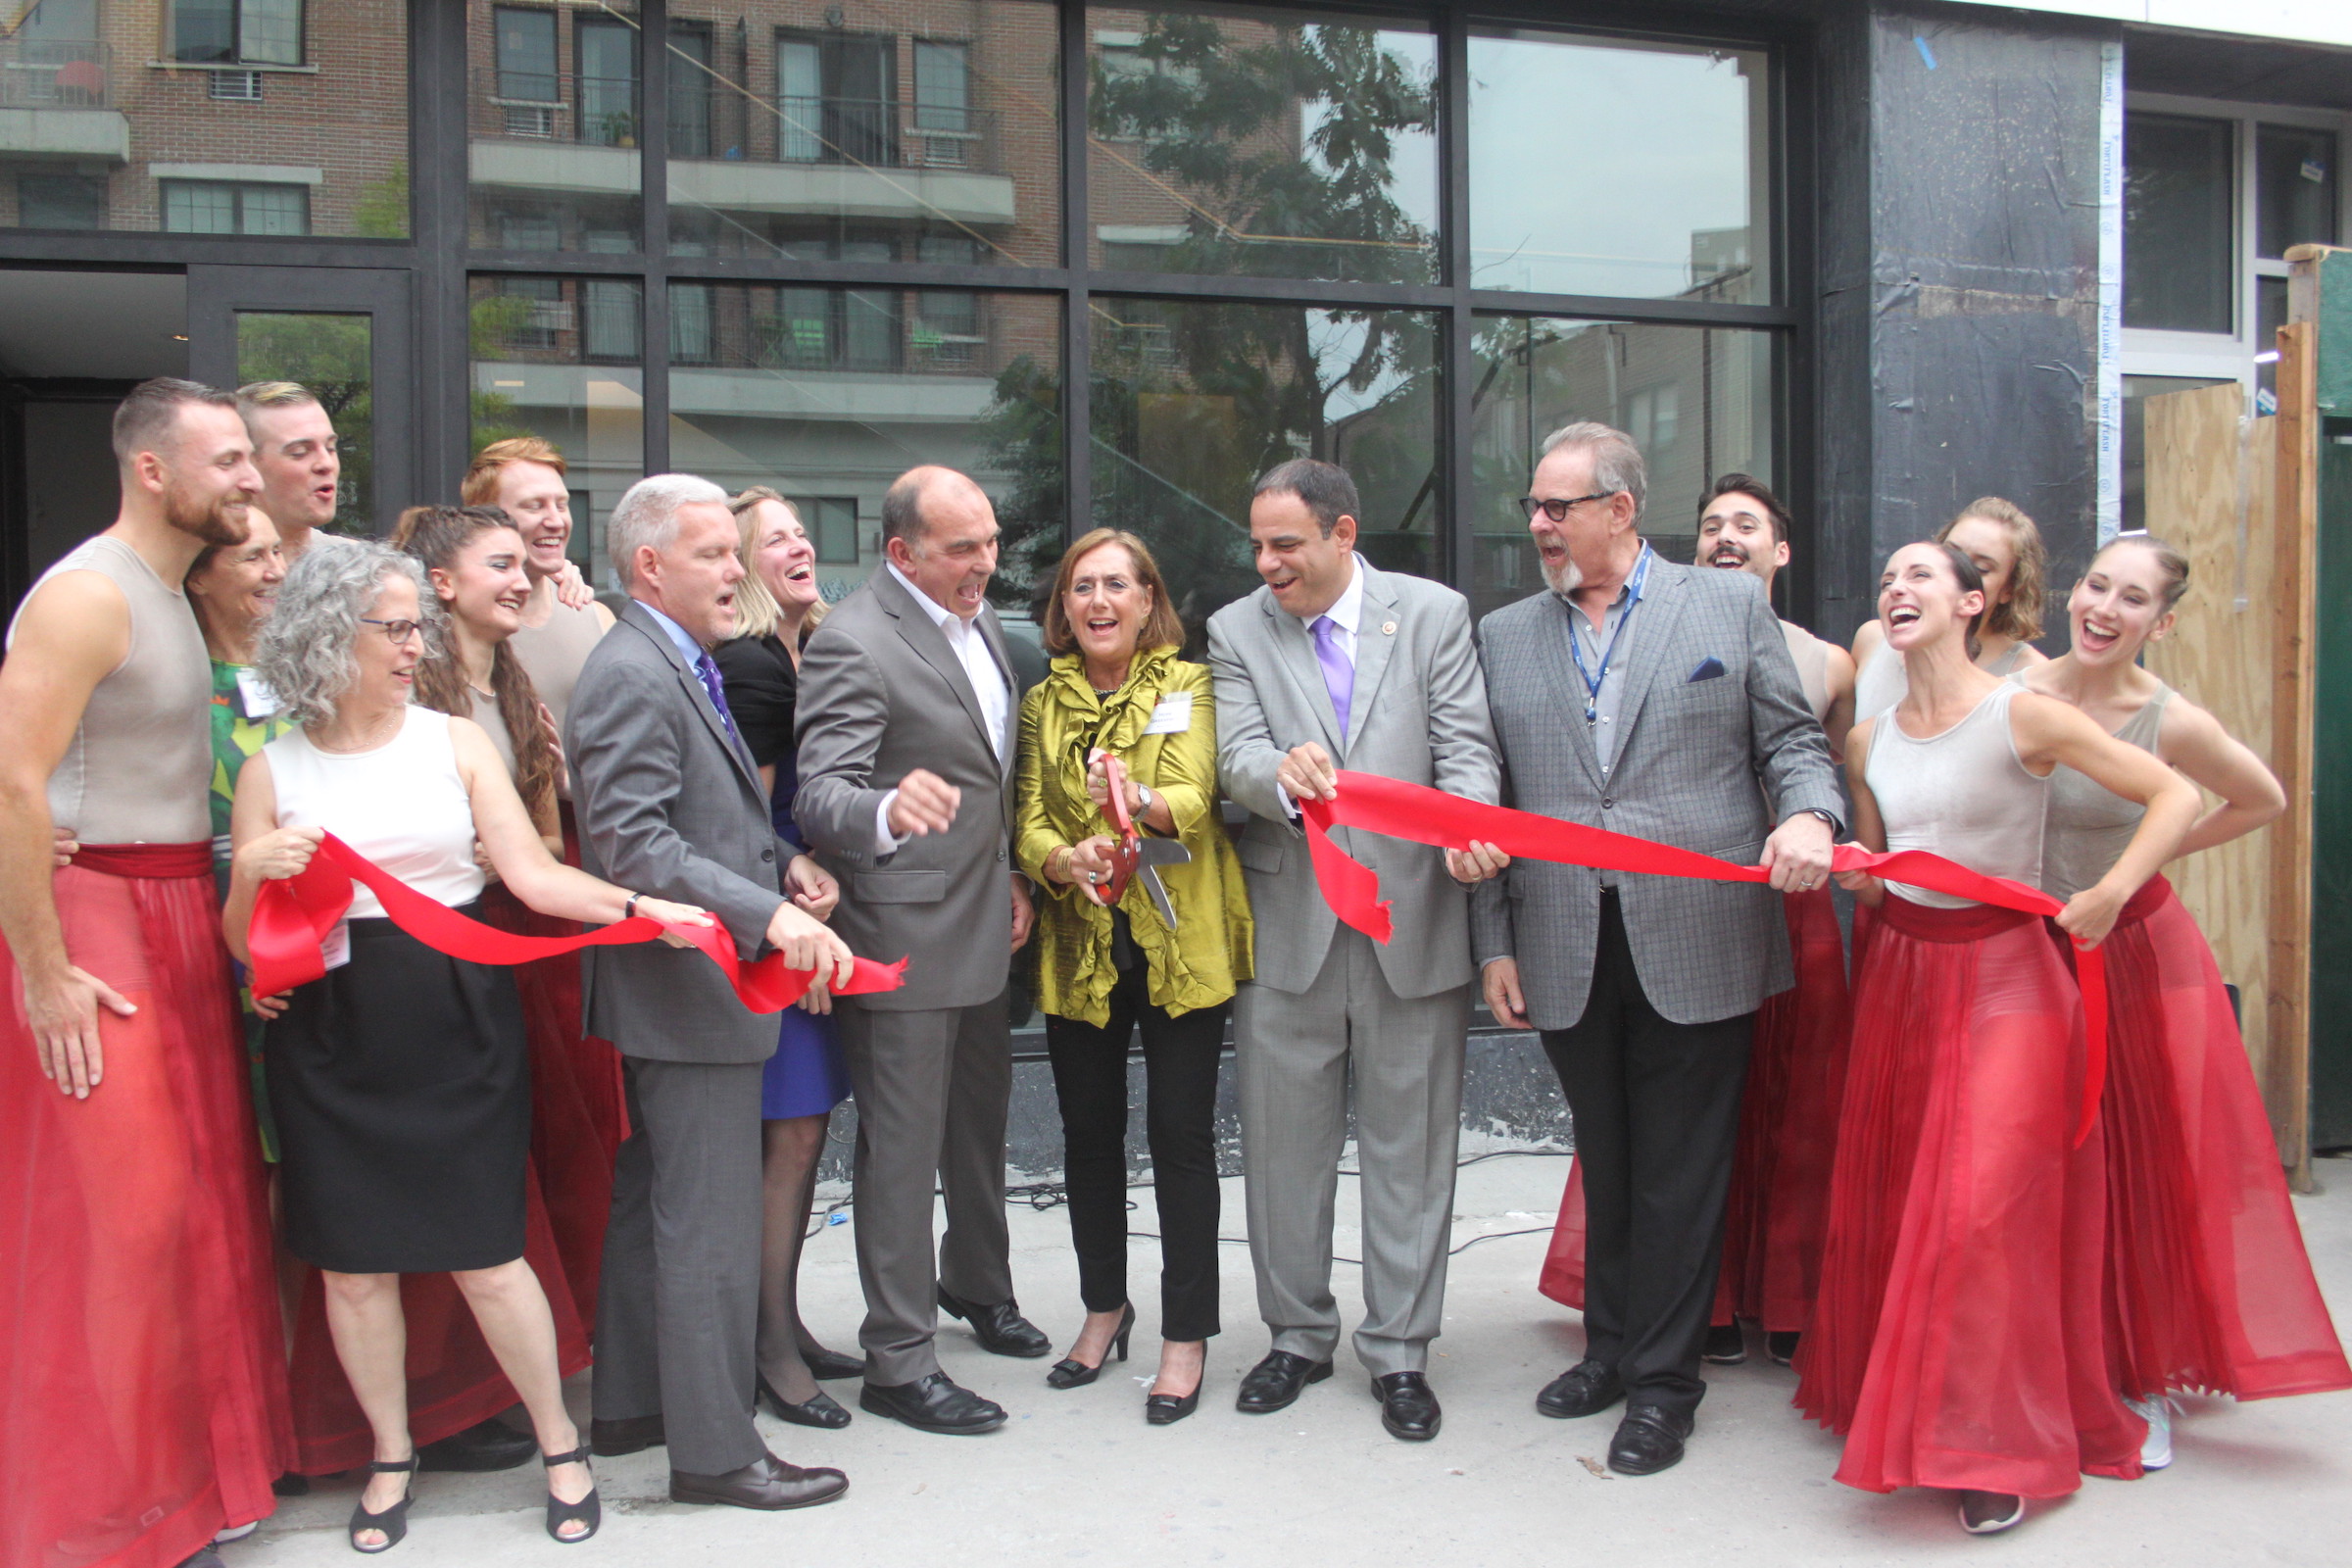 Astoria welcomed the RIOULT Dance Center to Steinway Street and 34th Avenue with a ribbon cutting ceremony.